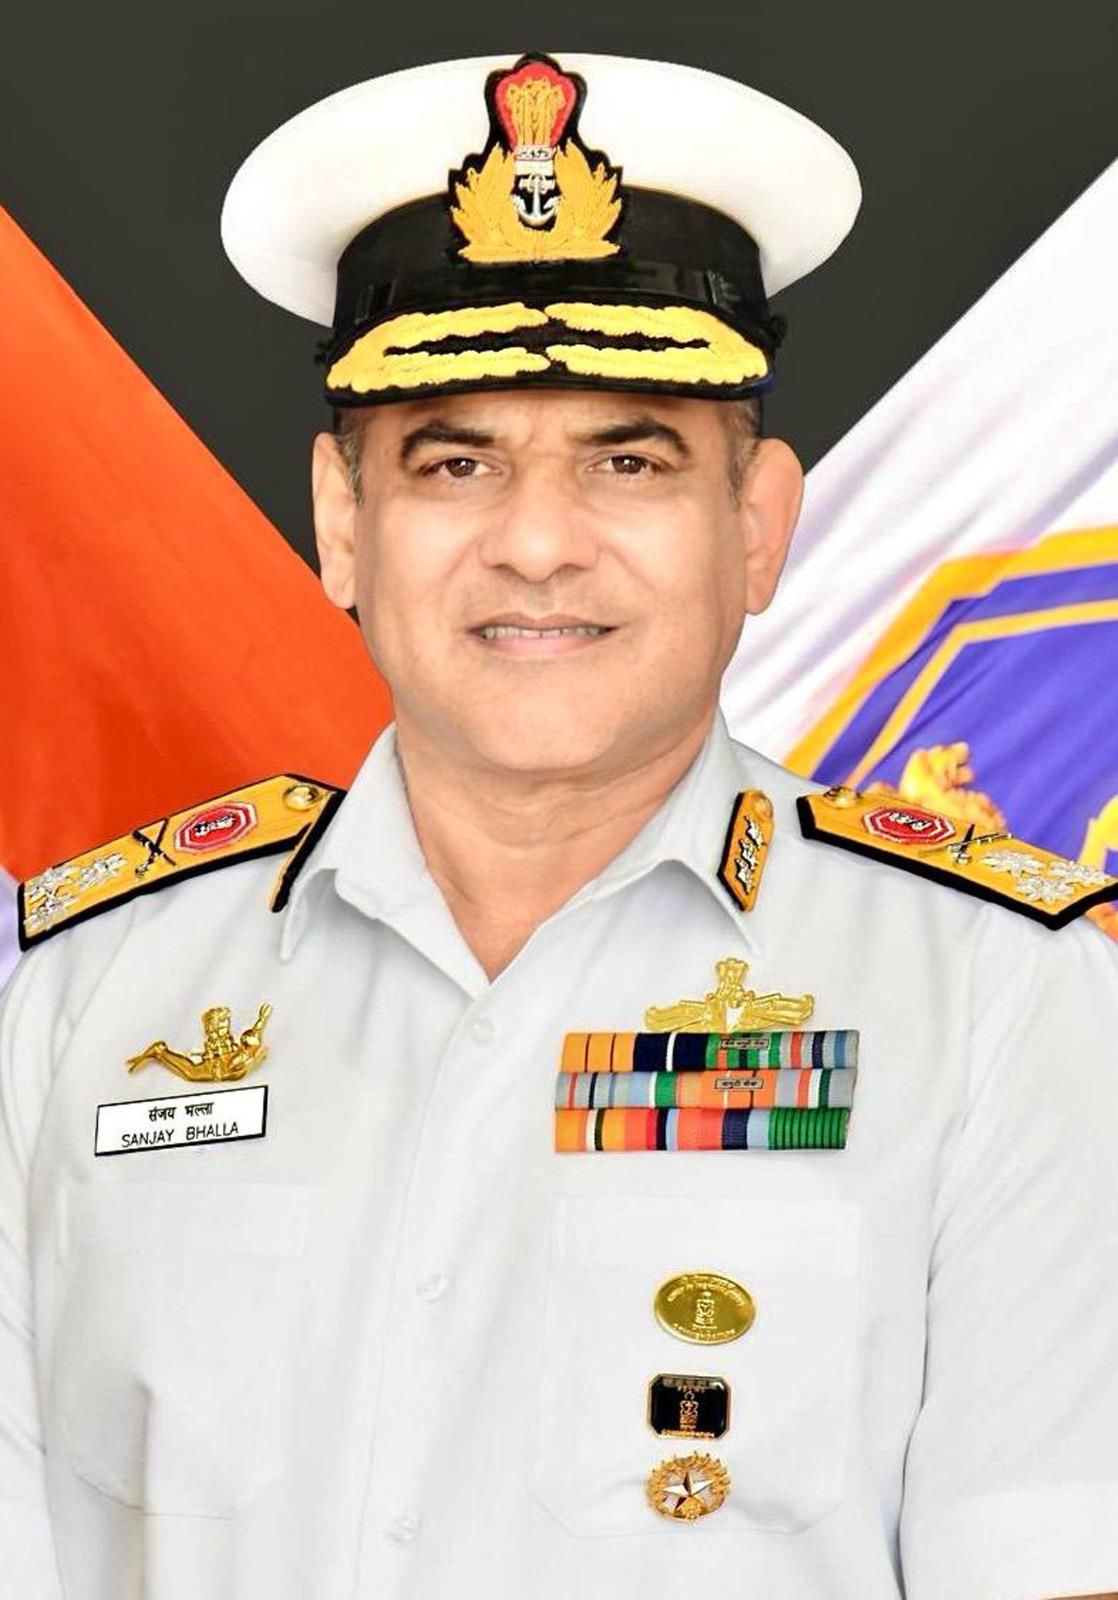 Vice Admiral Bhalla is Chief of Personnel of Indian Navy